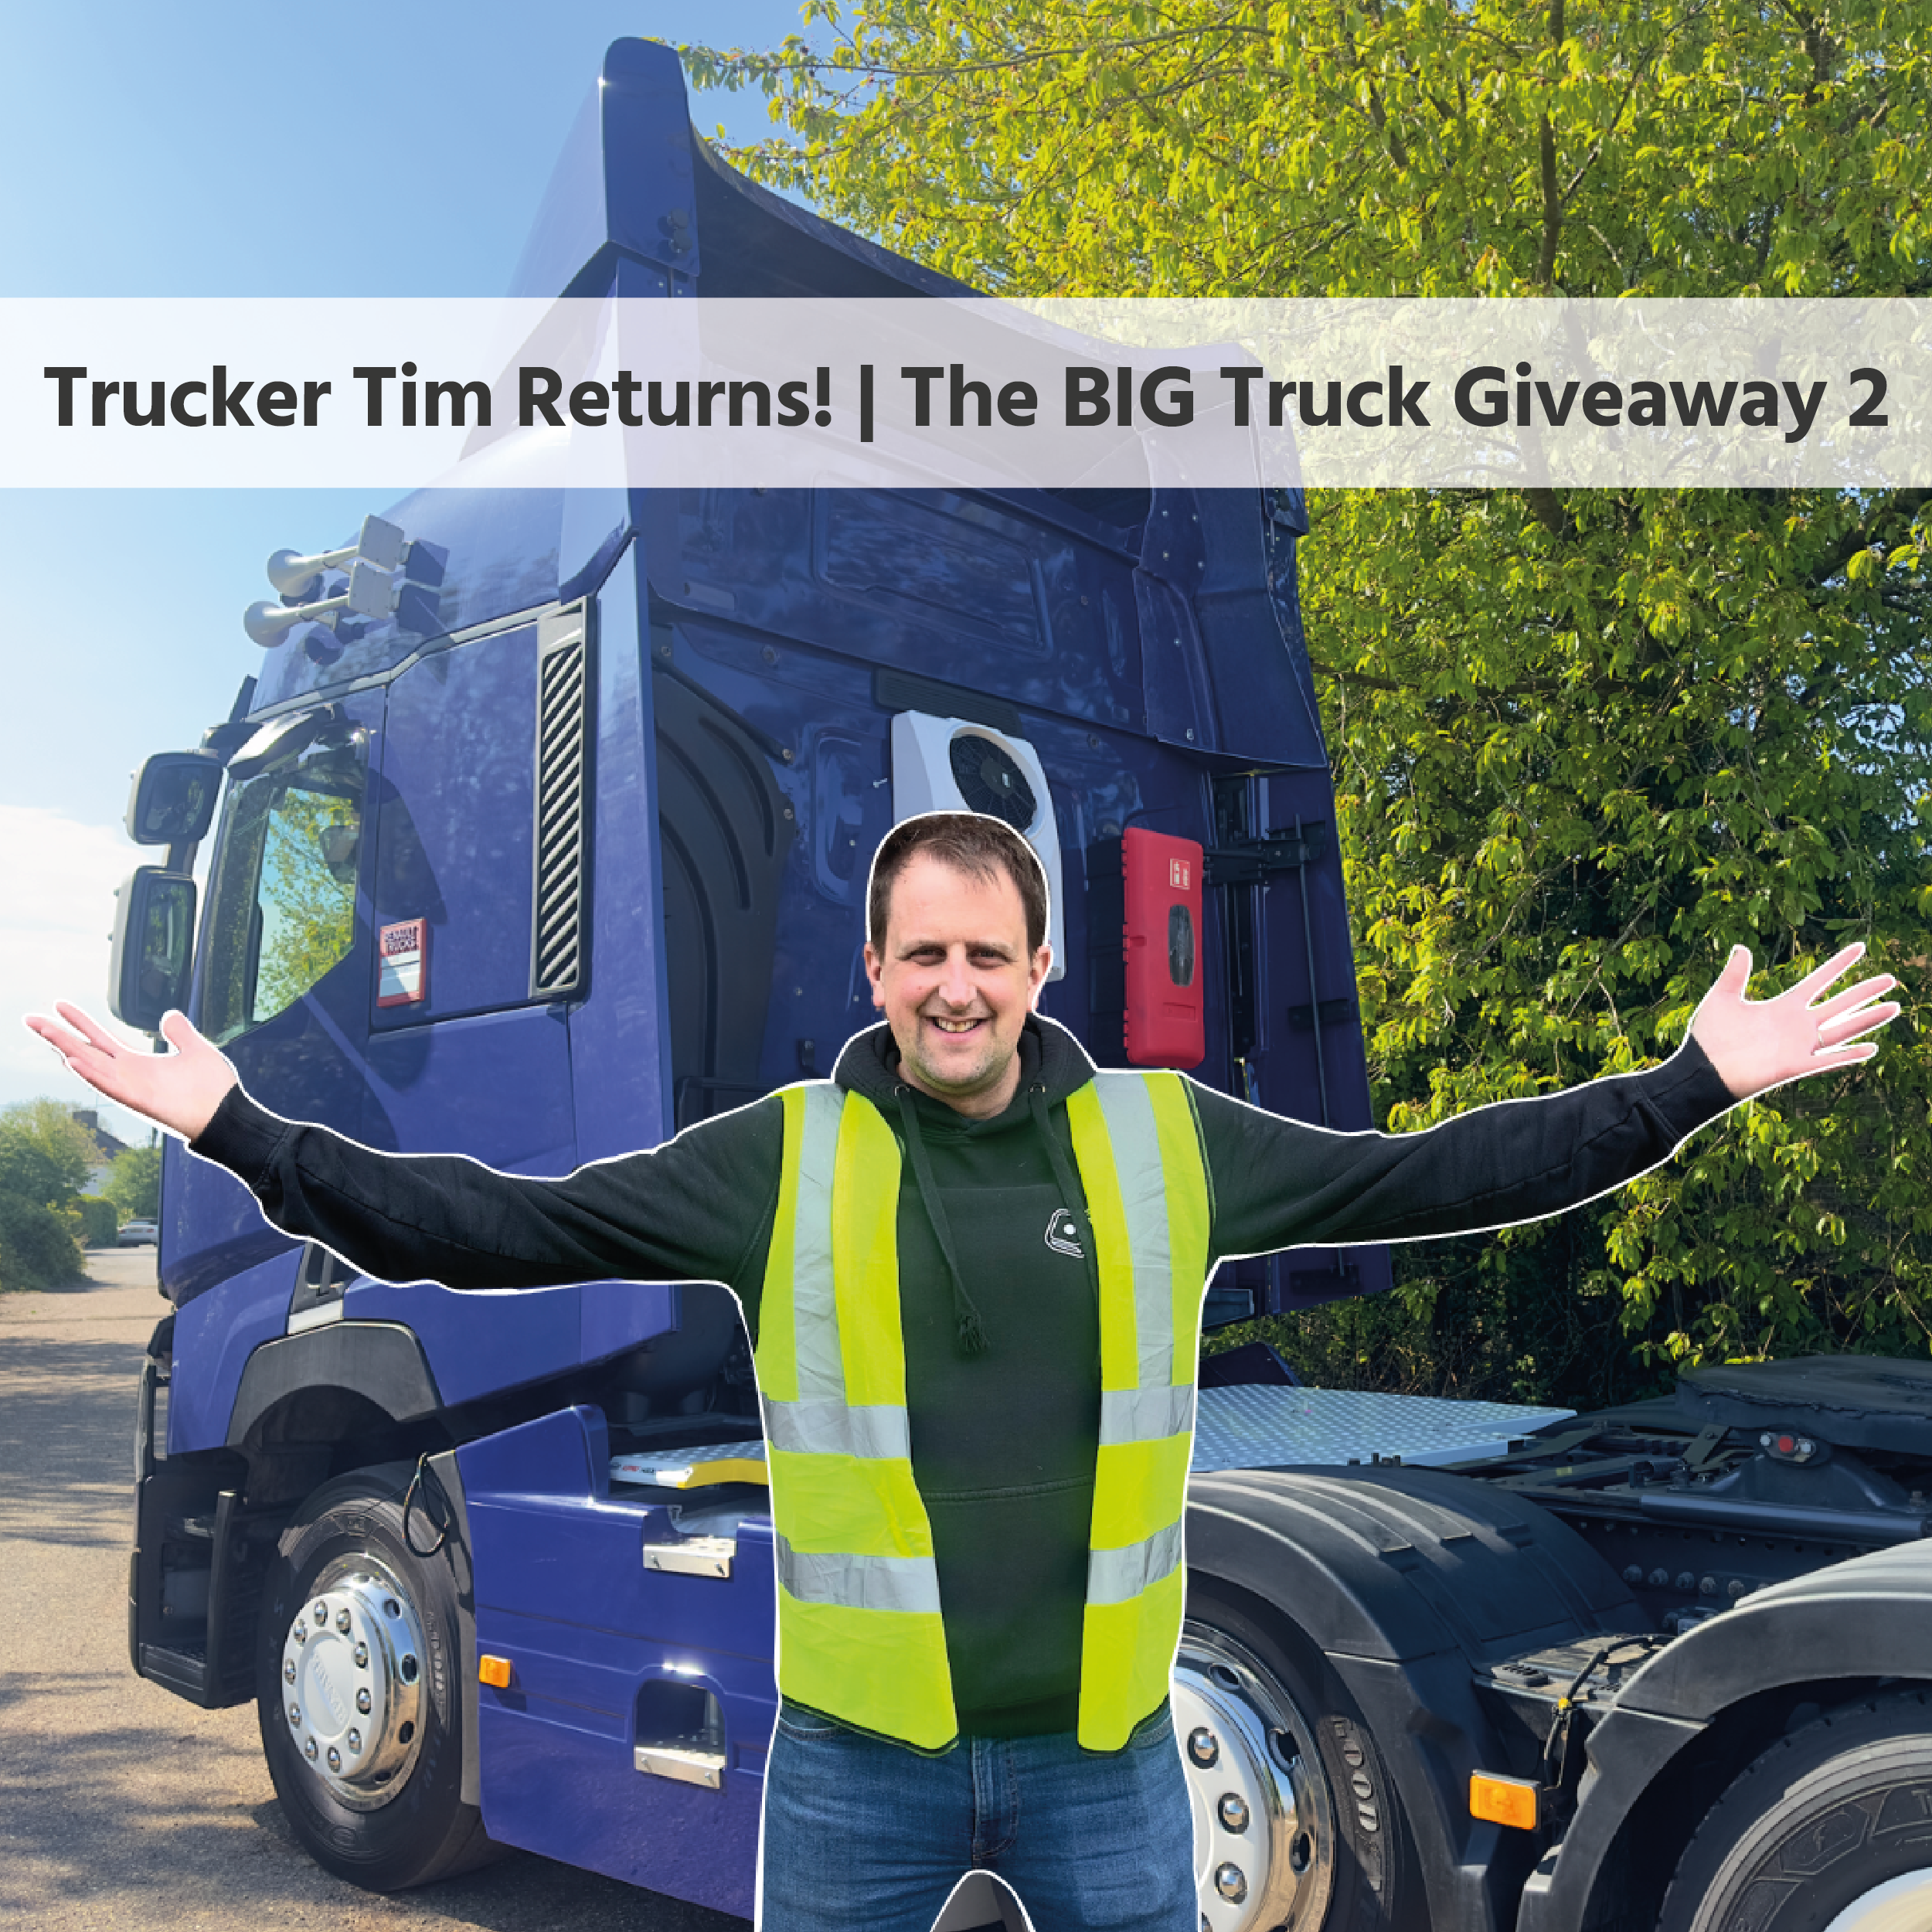 Trucker Tim Ruins Our Truck Again?! | The Big Truck Giveaway 2